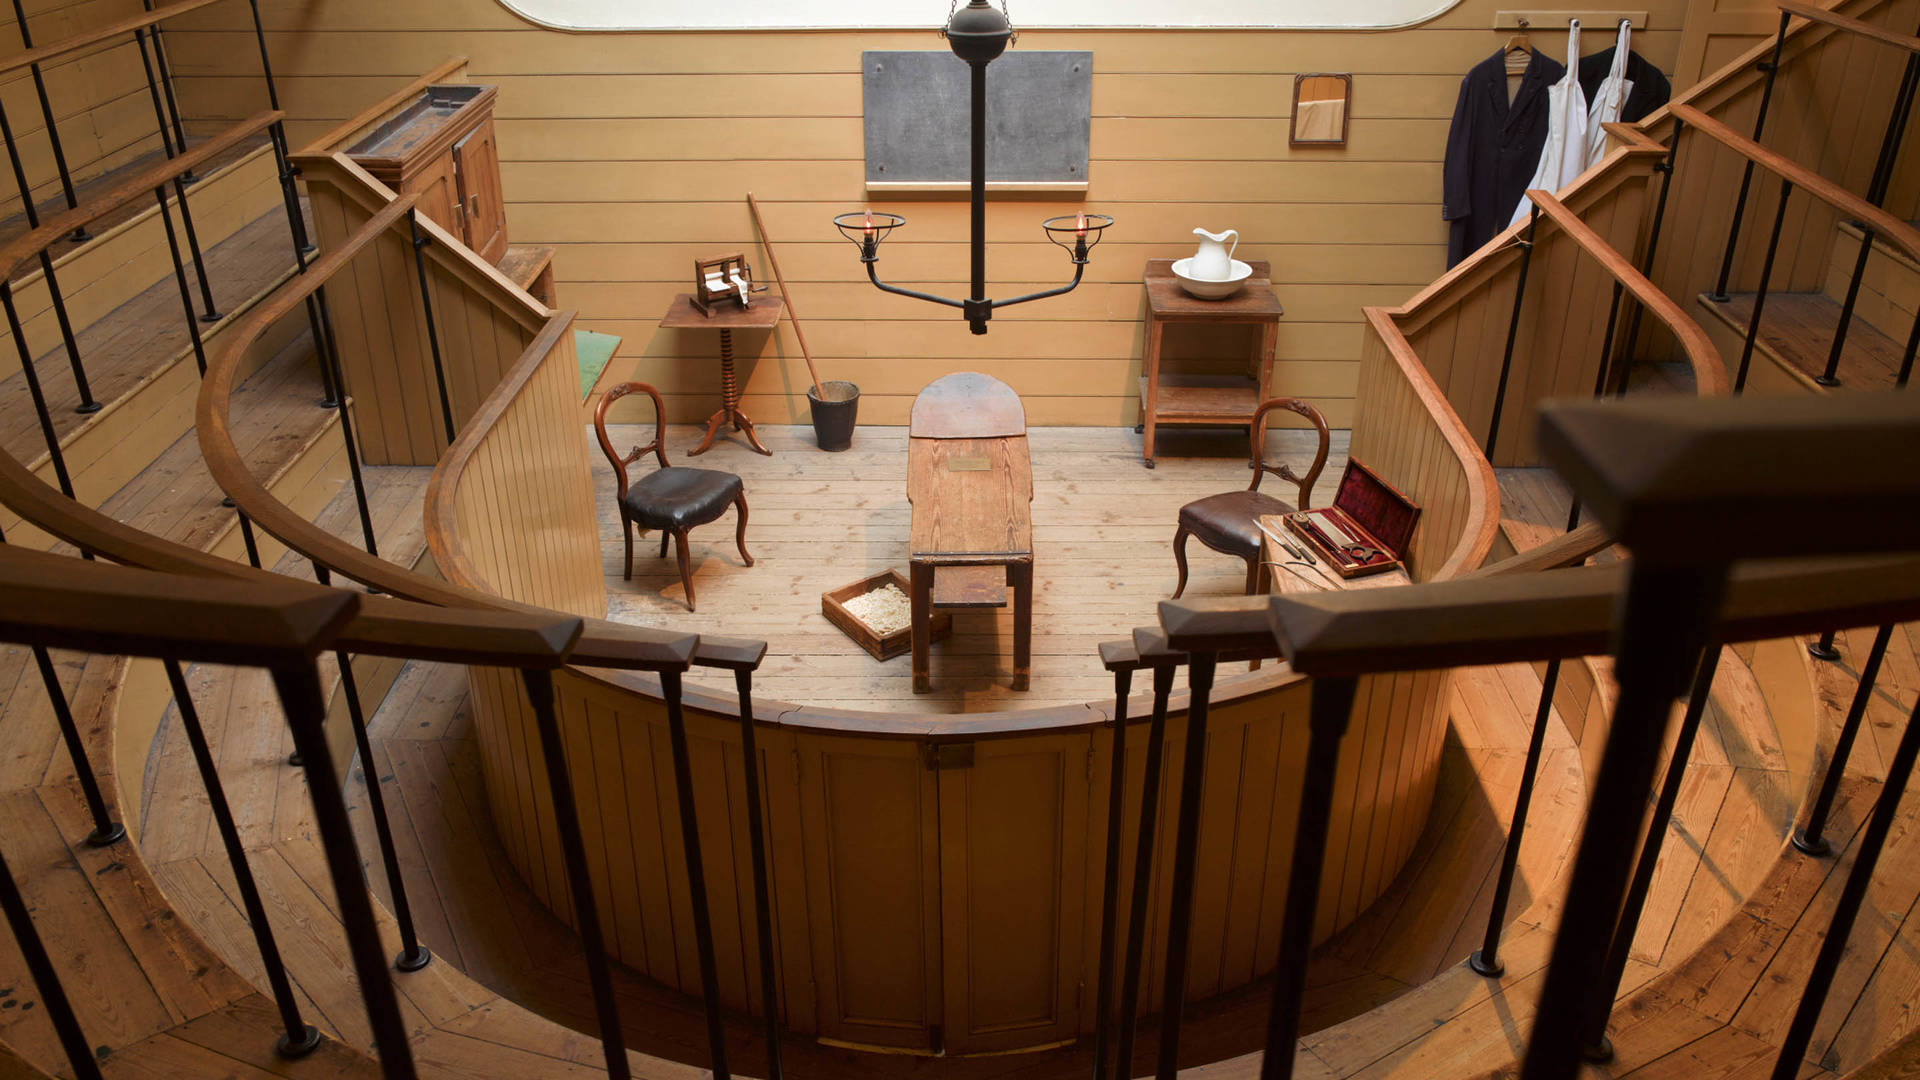 A look at the old operating theatre room in the Old Operating Theatre Museum and Herb Garret London Jumeirah